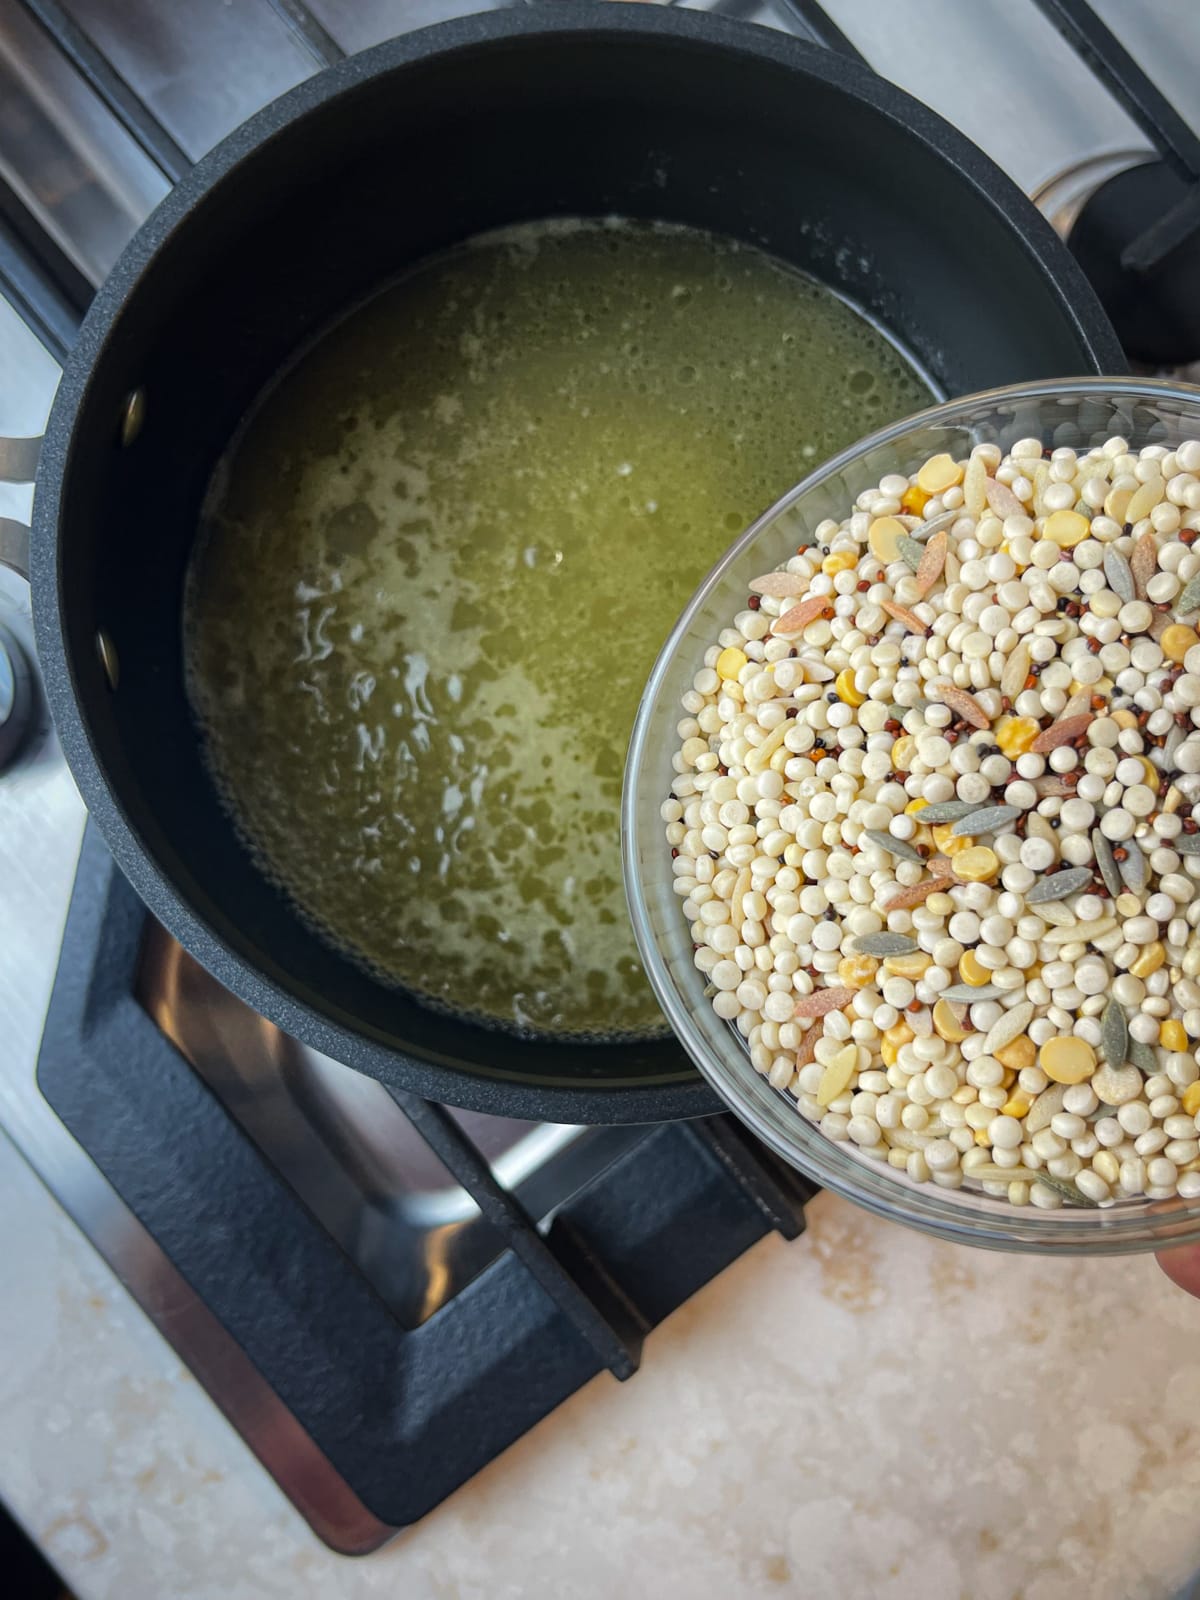 Couscous quinoa blend being put into a pot of chicken broth on a stove.